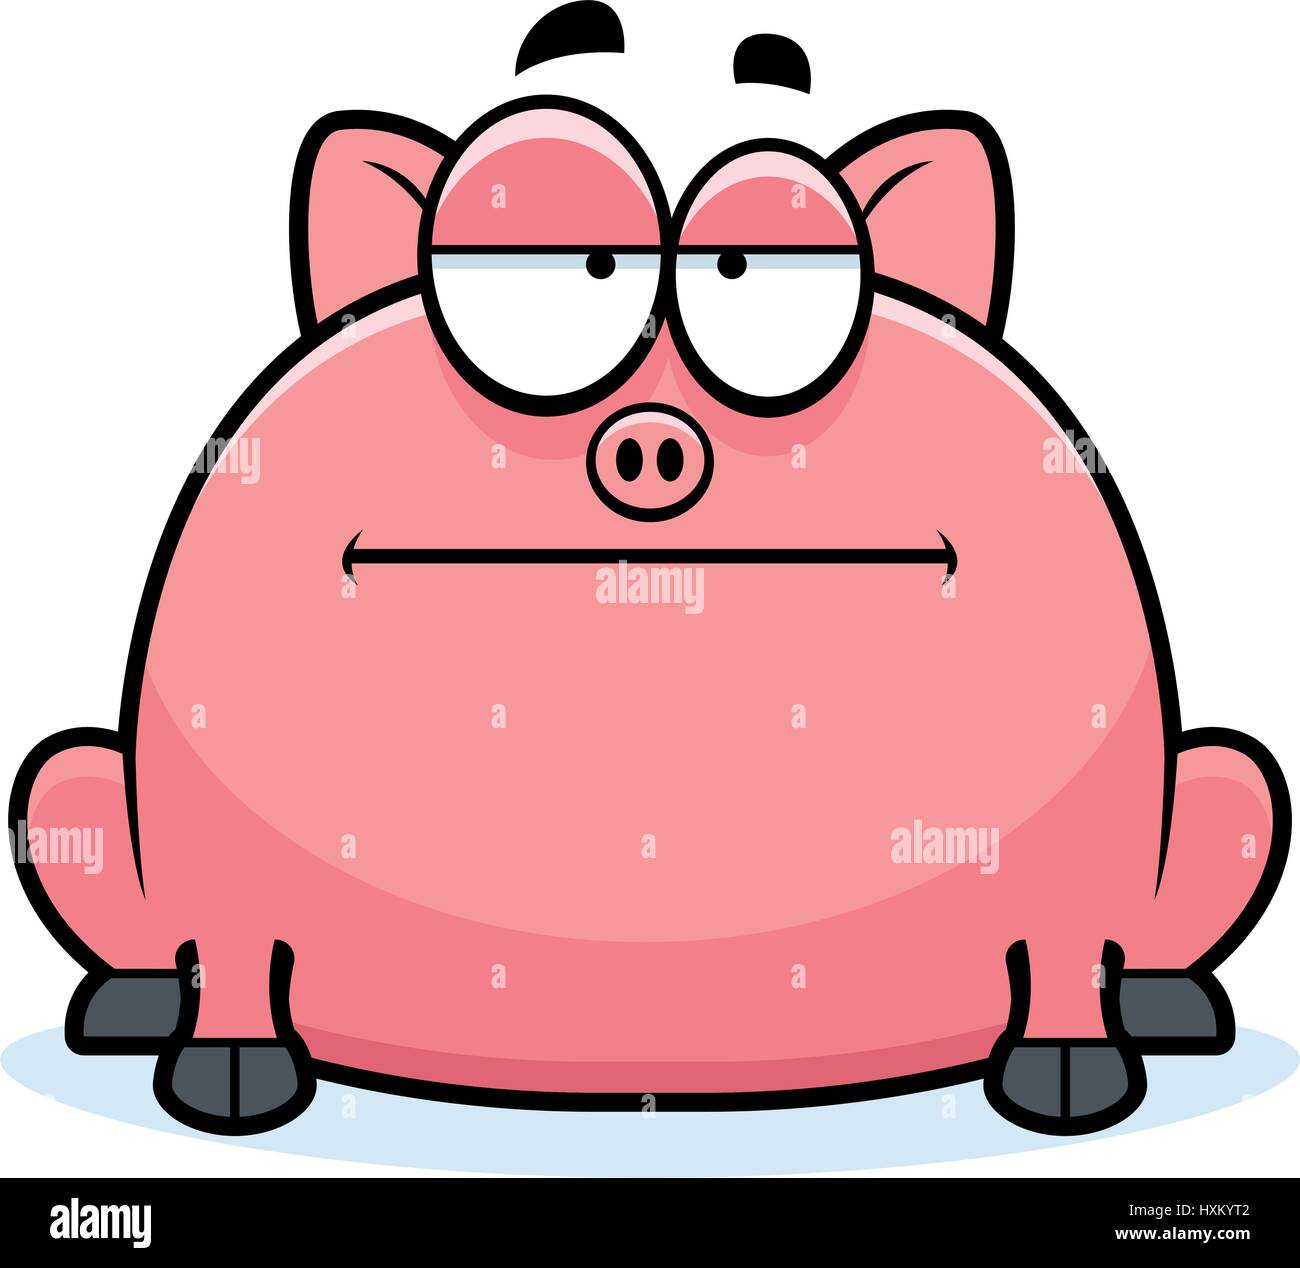 A cartoon illustration of a little pig looking calm. Stock Vector